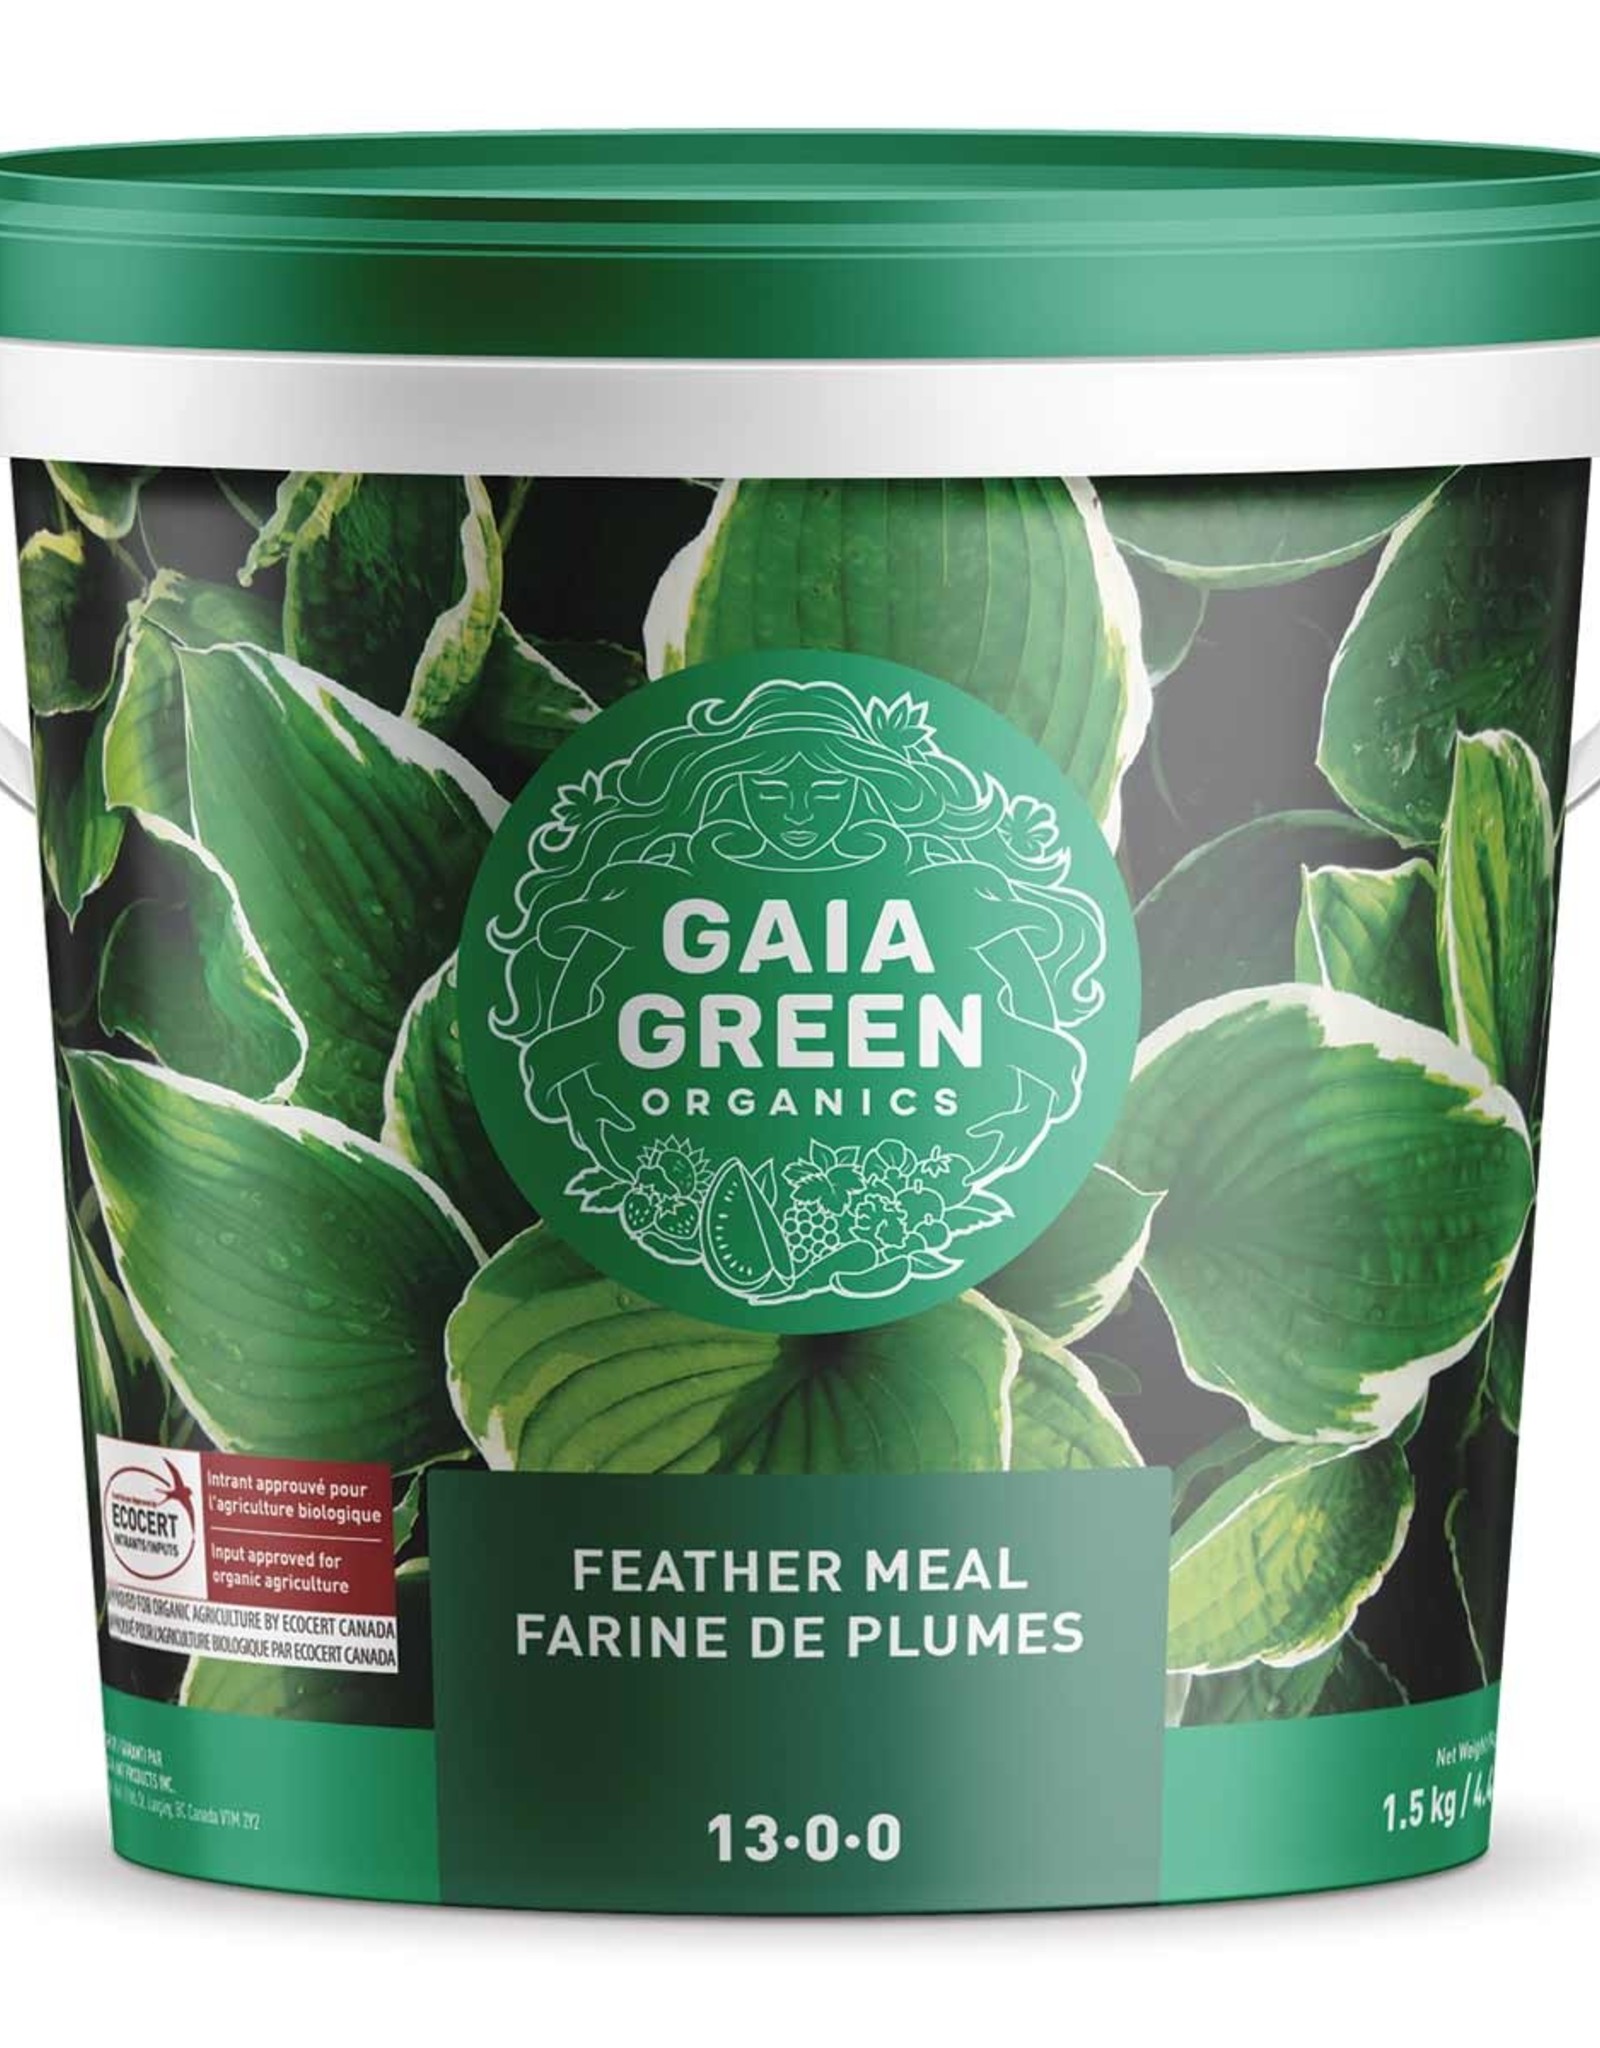 Gaia Feather Meal 13-0-0 1.5 kg